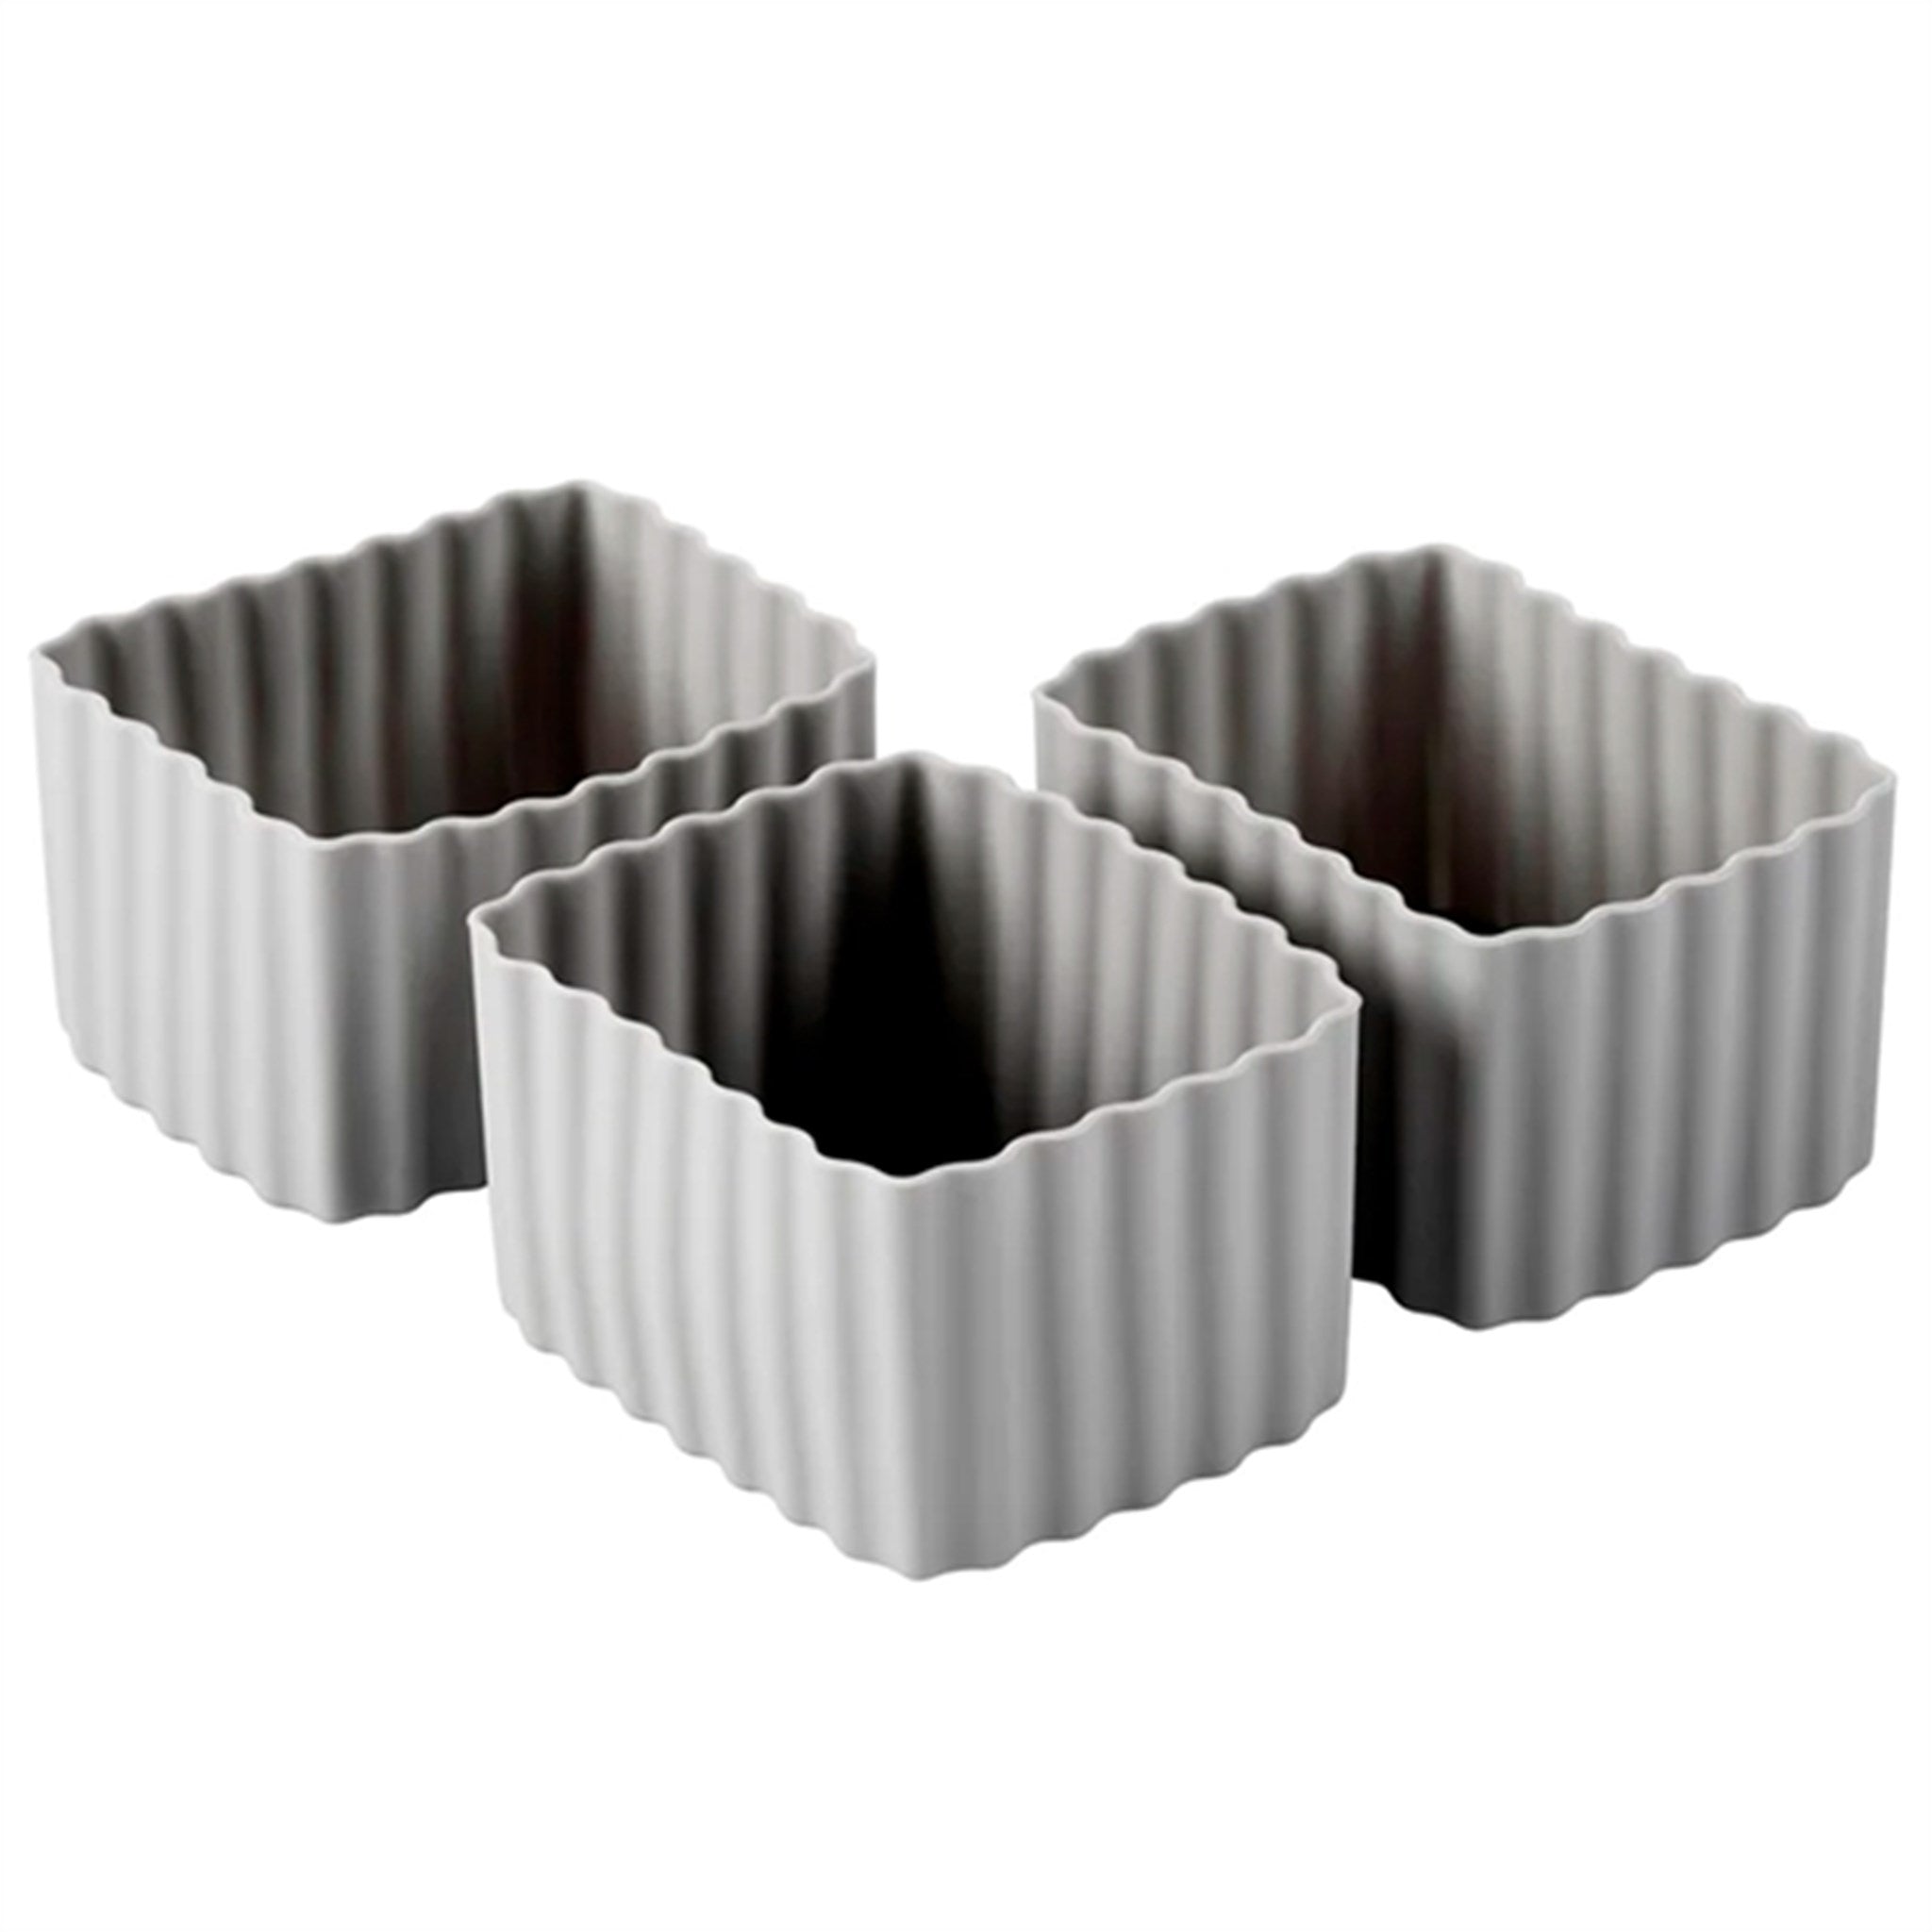 Little Lunch Box Co Bento Silicone Cups Small Grey